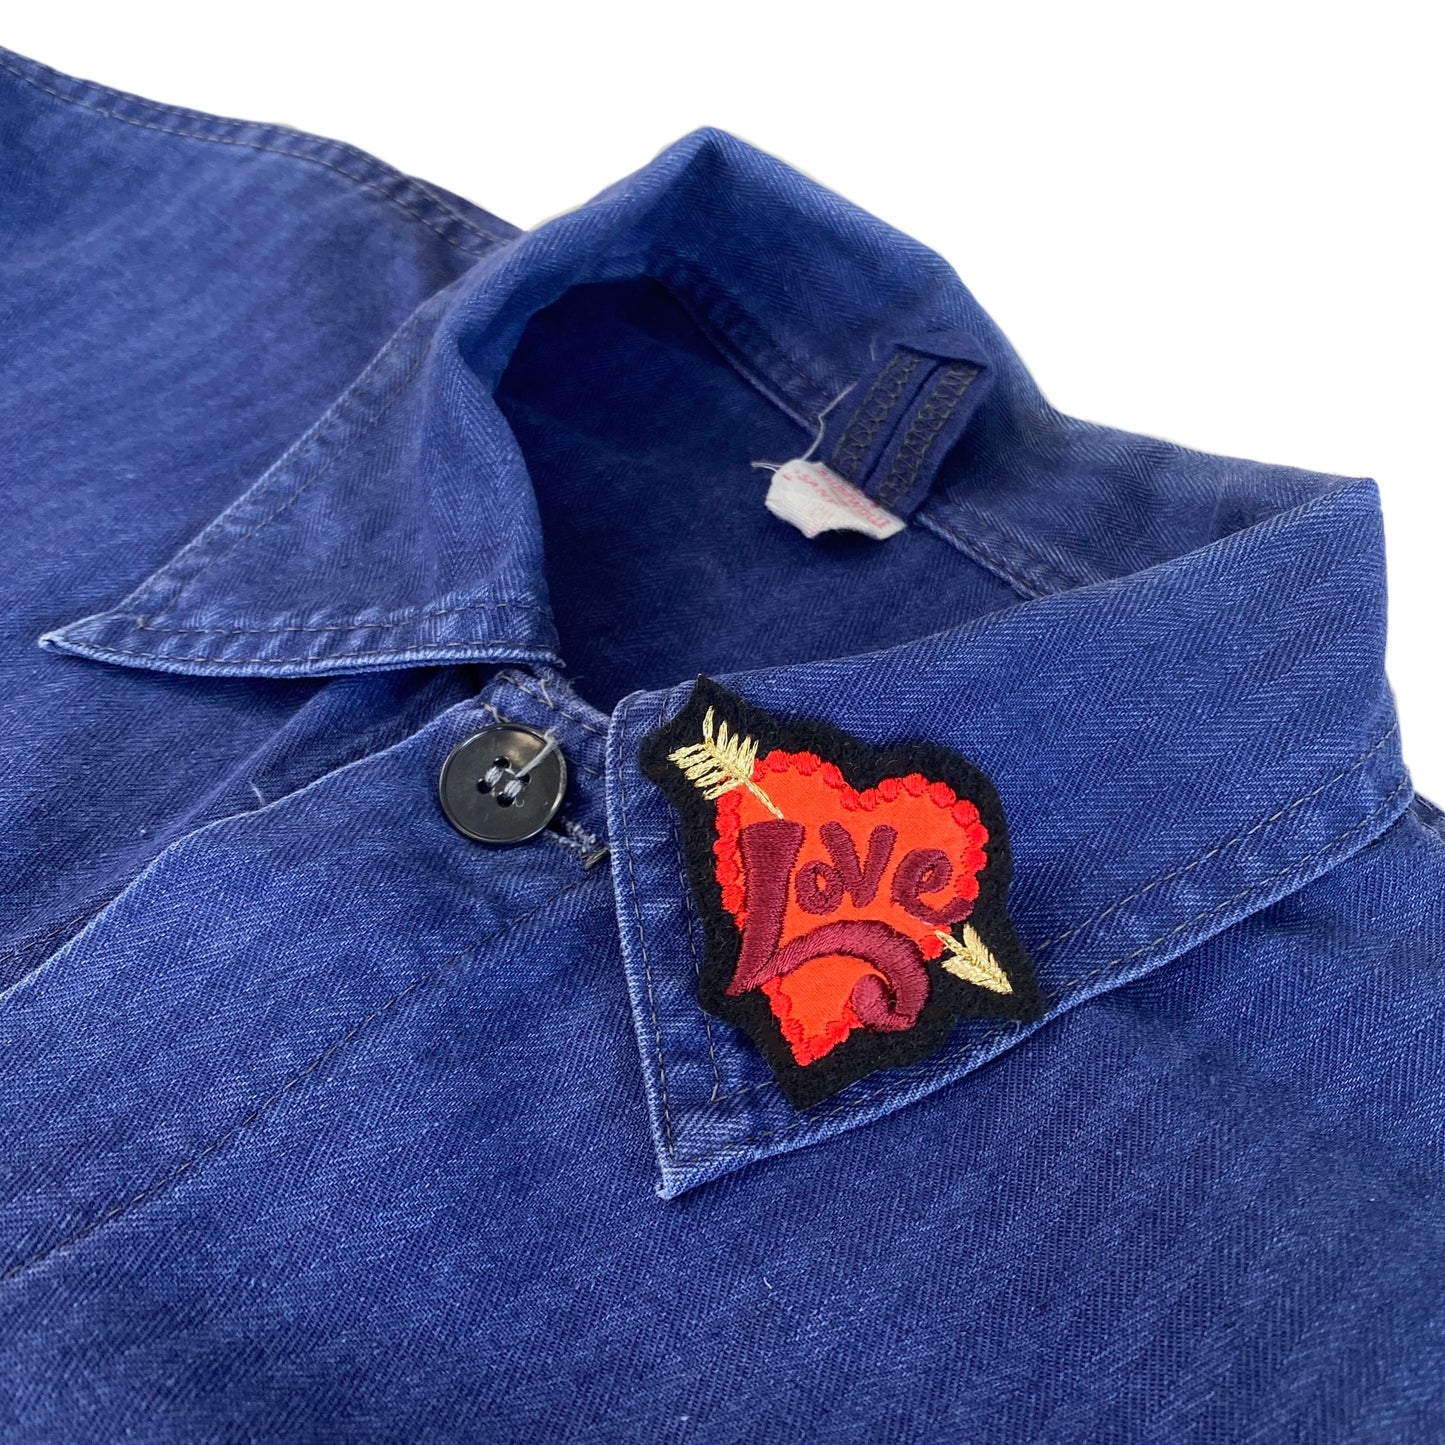 Tiny love embroidered patch shown on collar of blue jacket